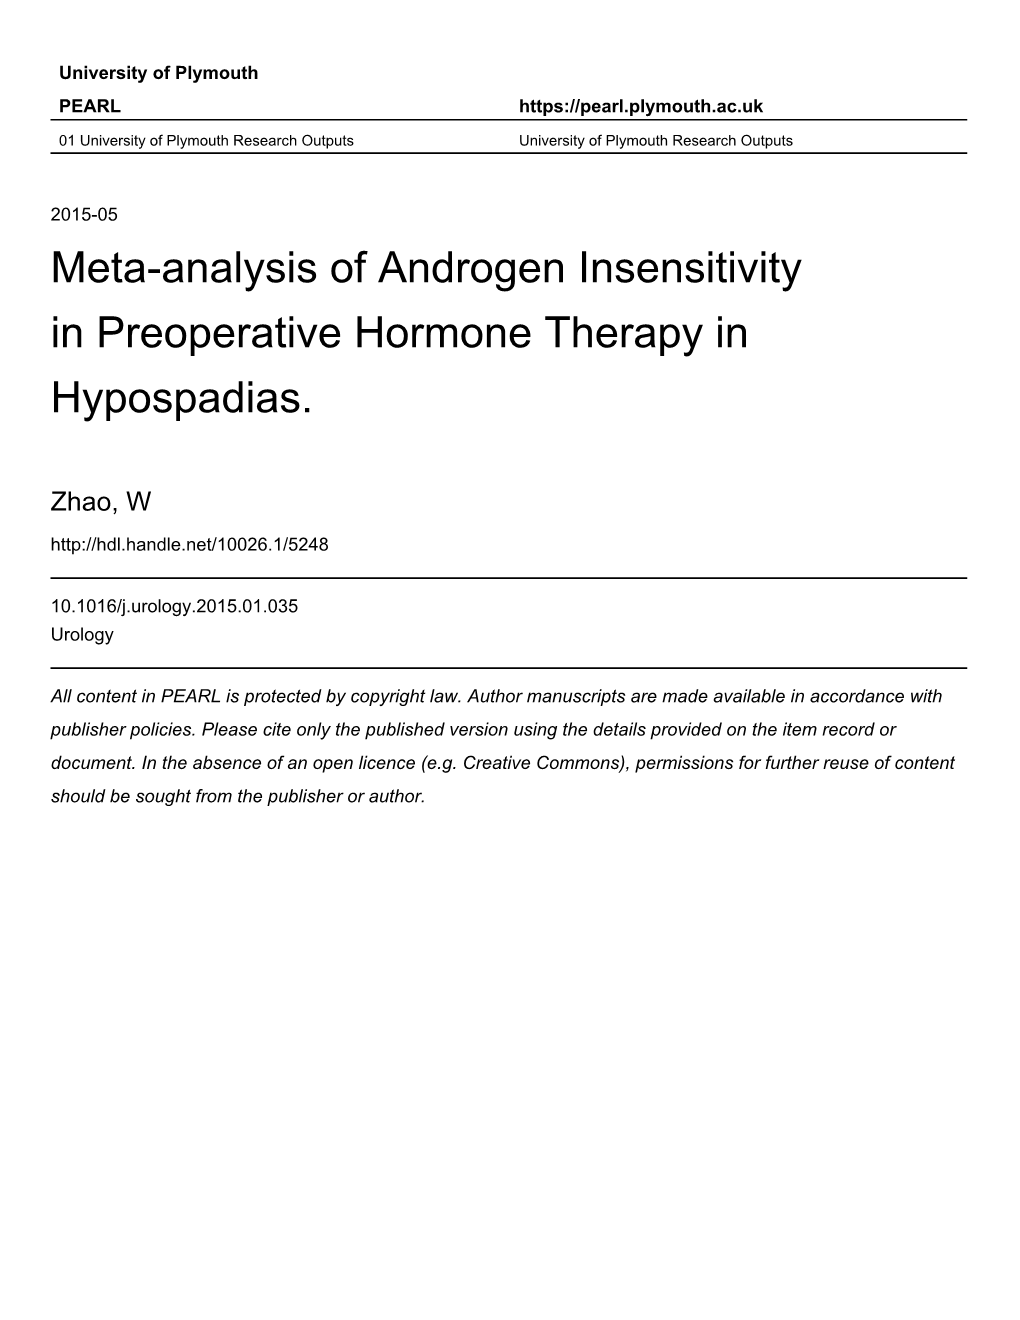 Meta-Analysis of Androgen Insensitivity in Preoperative Hormone Therapy in Hypospadias